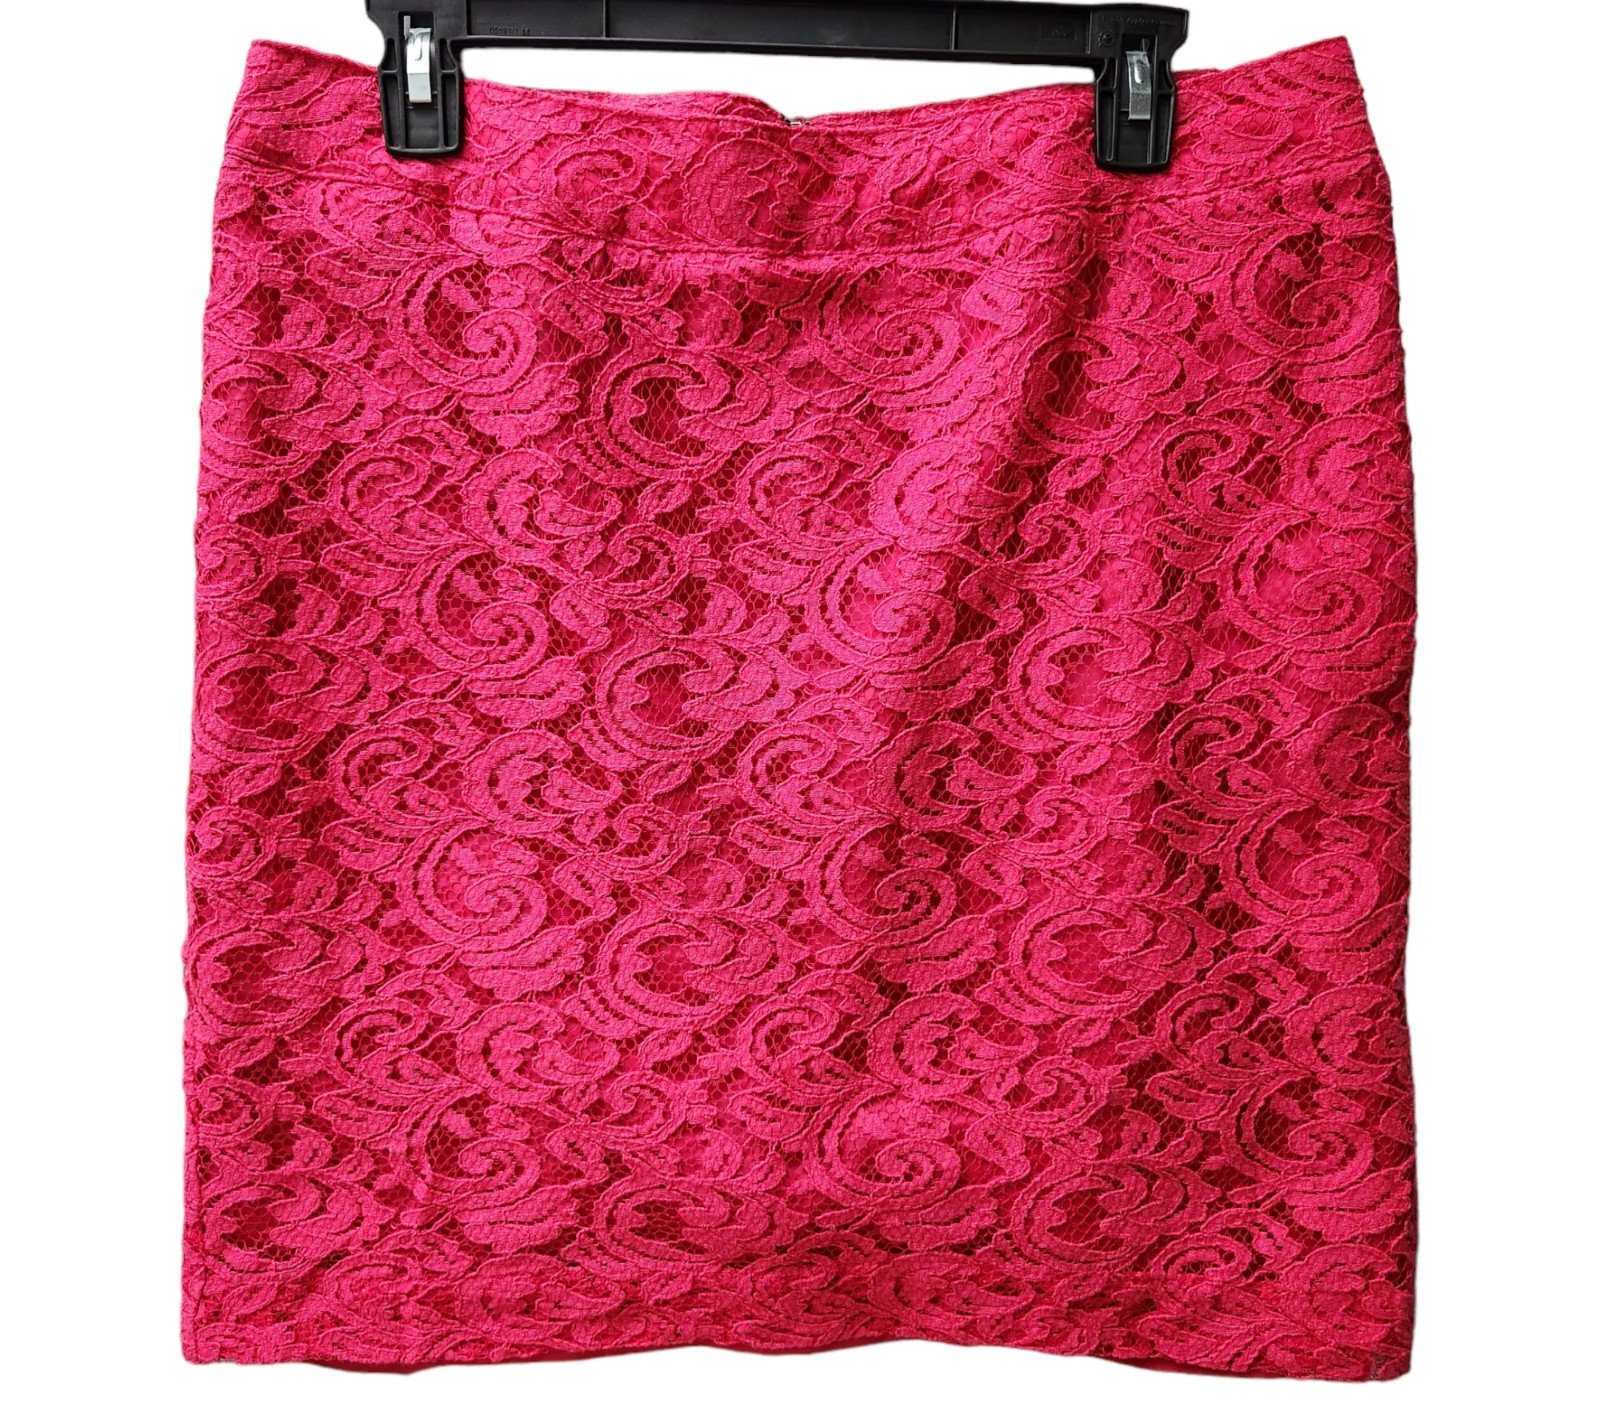 Discounted Merona Straight Skirt, Size 10, Pink Lace PfKnl4oc7 Wholesale